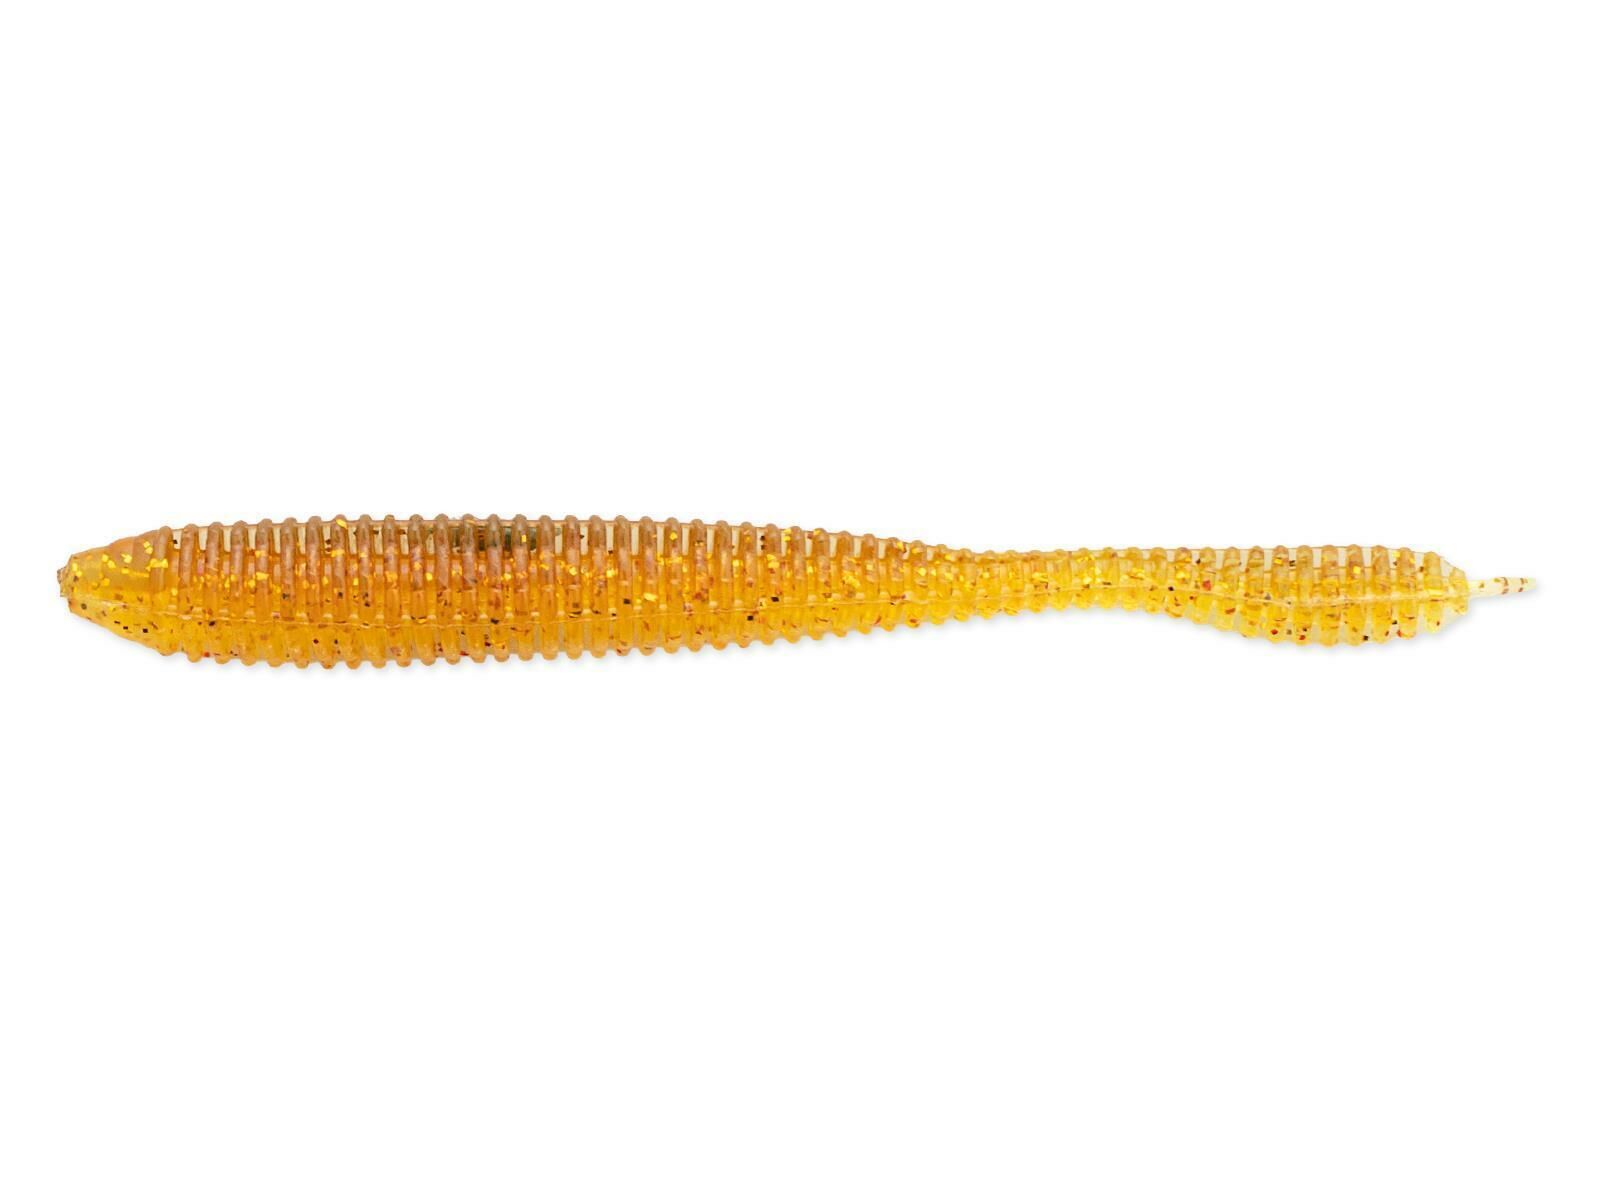 4" Bubbling Shaker - Golden Goby (BA-Edition)